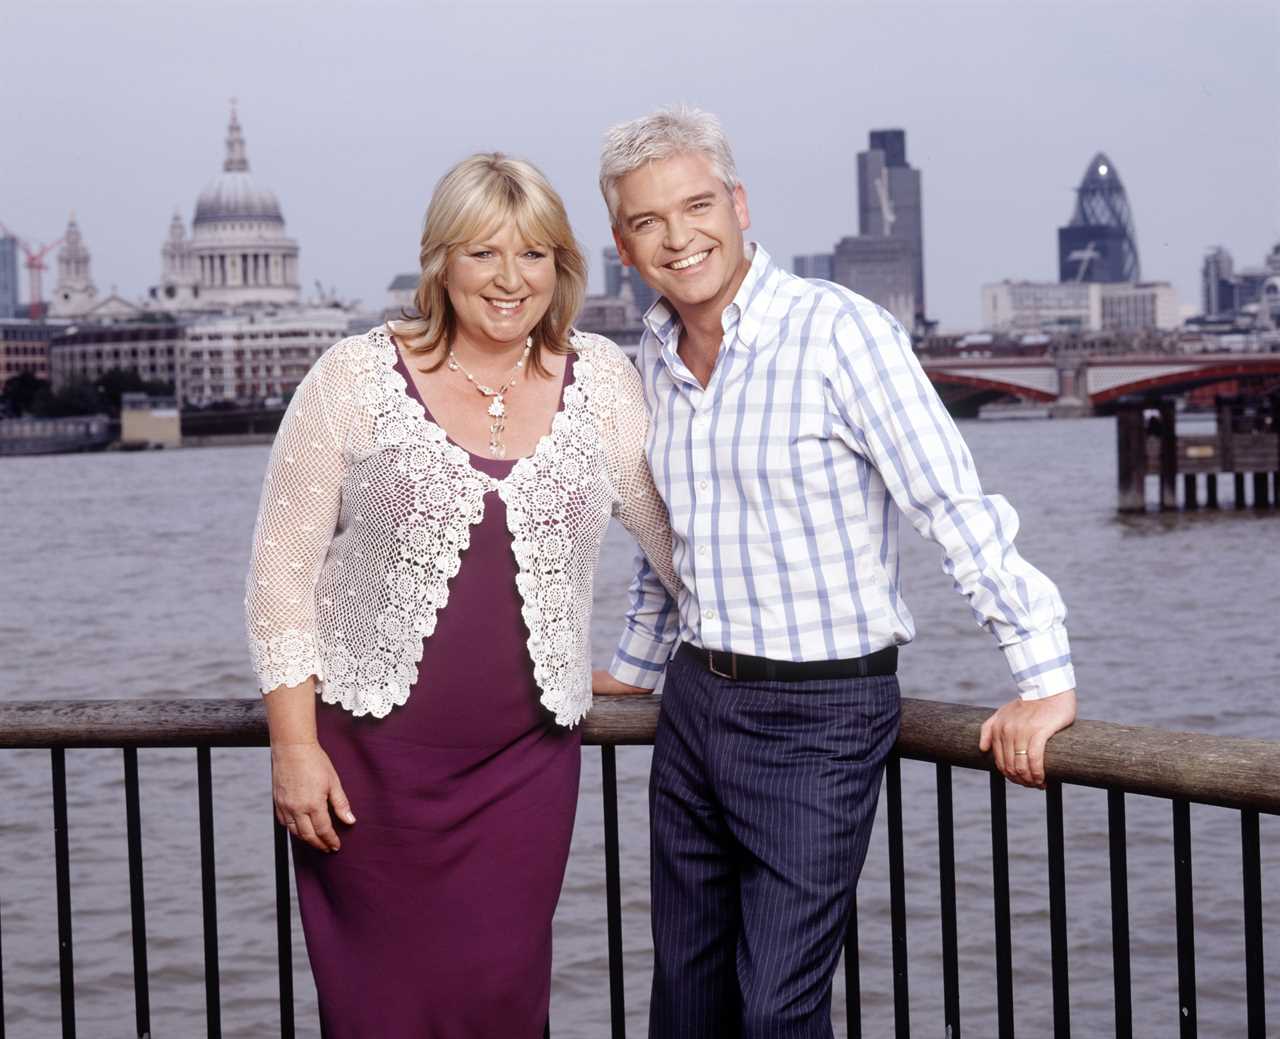 Fern Britton breaks her silence after Phillip Schofield’s emotional interview about This Morning affair